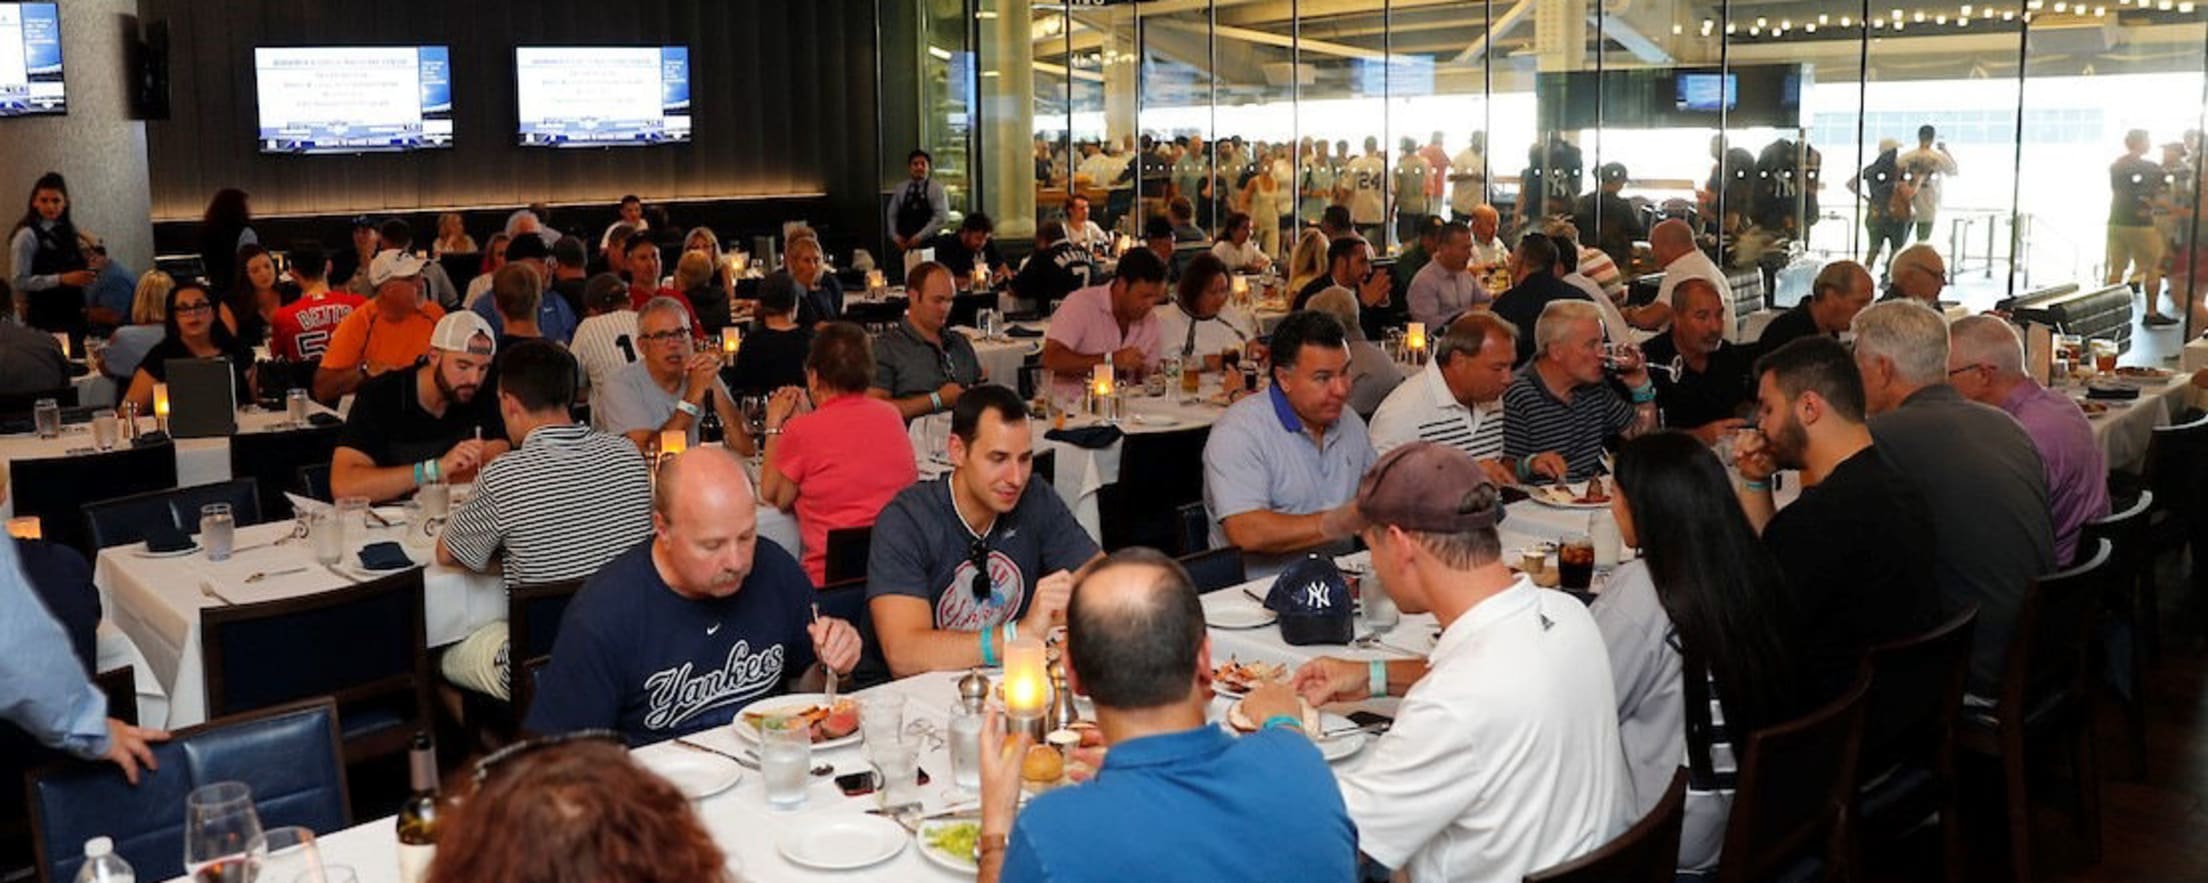 Yankee Stadium Suite Games and Tours with Yankee Legends